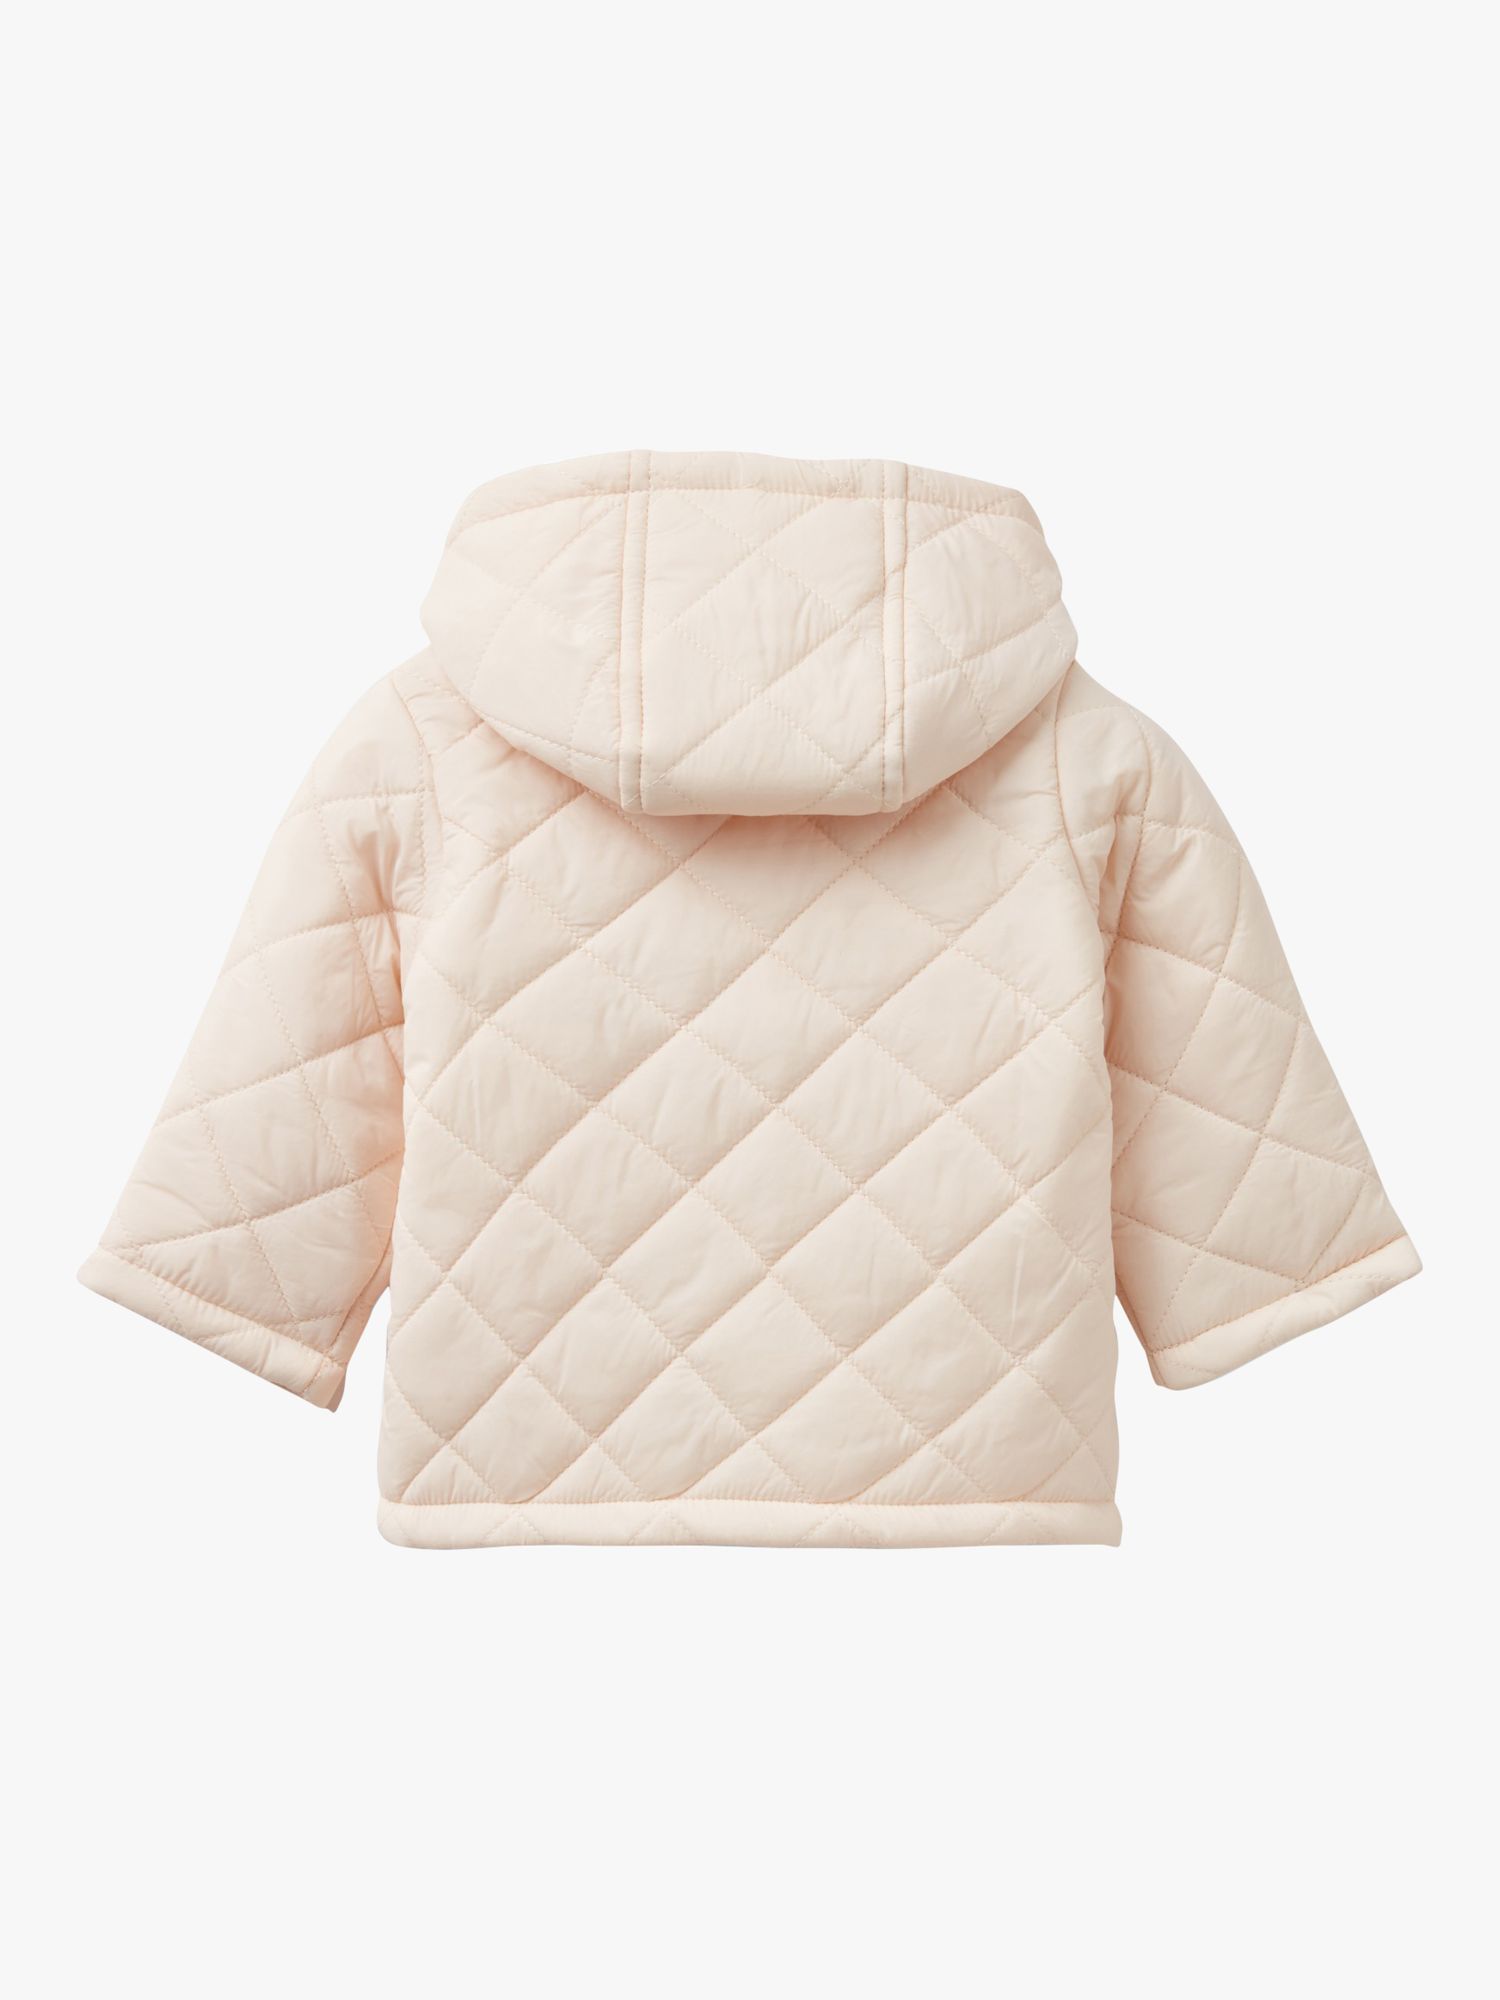 Buy Benetton Baby Quilted Hooded Jacket Online at johnlewis.com